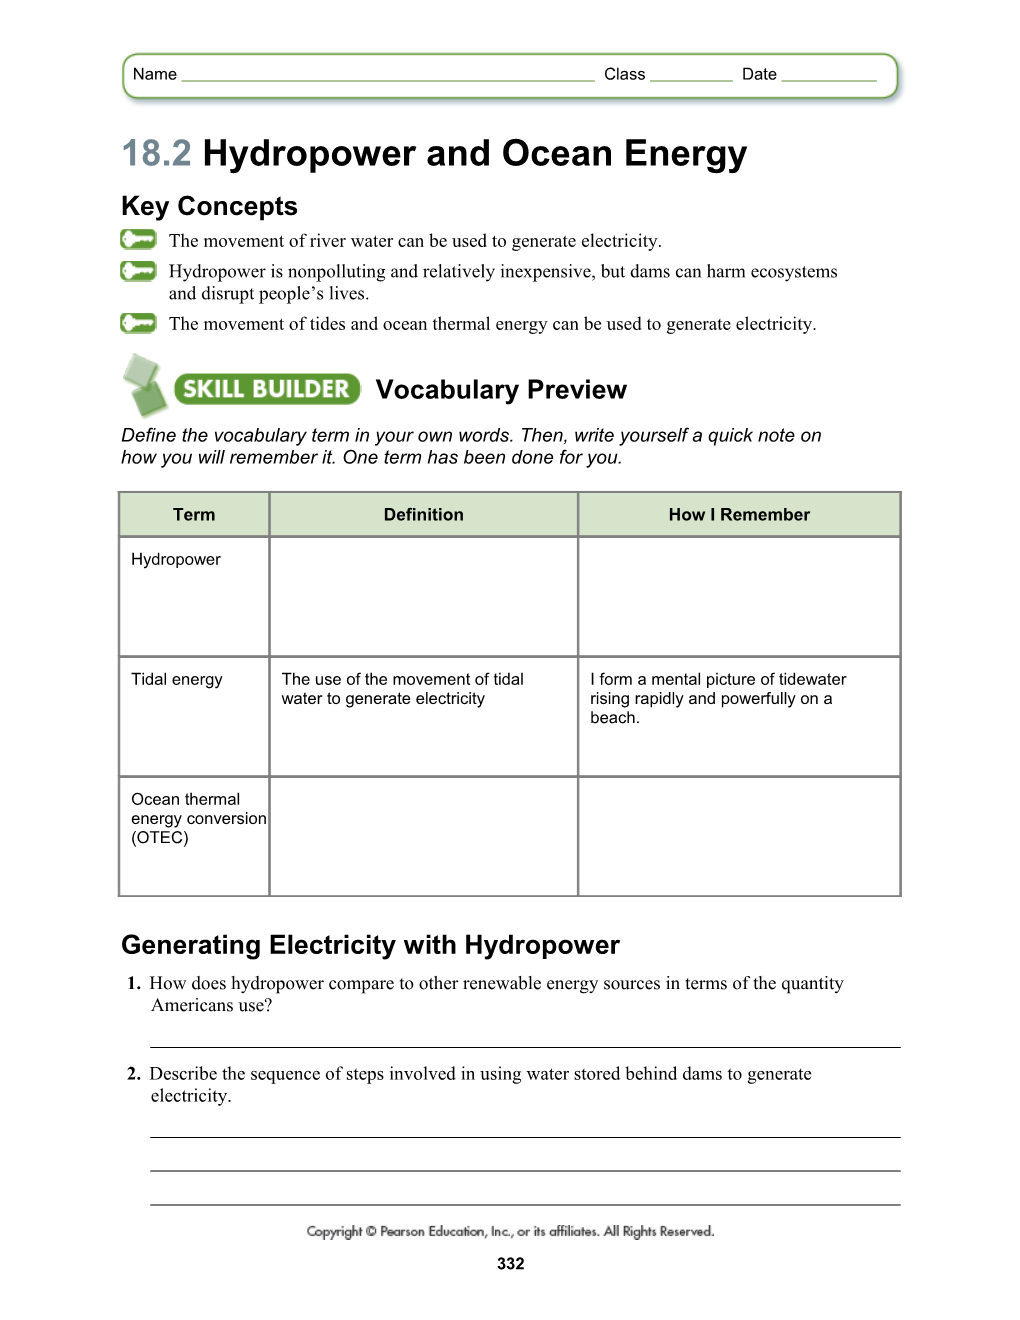 18.2 Hydropower and Ocean Energy